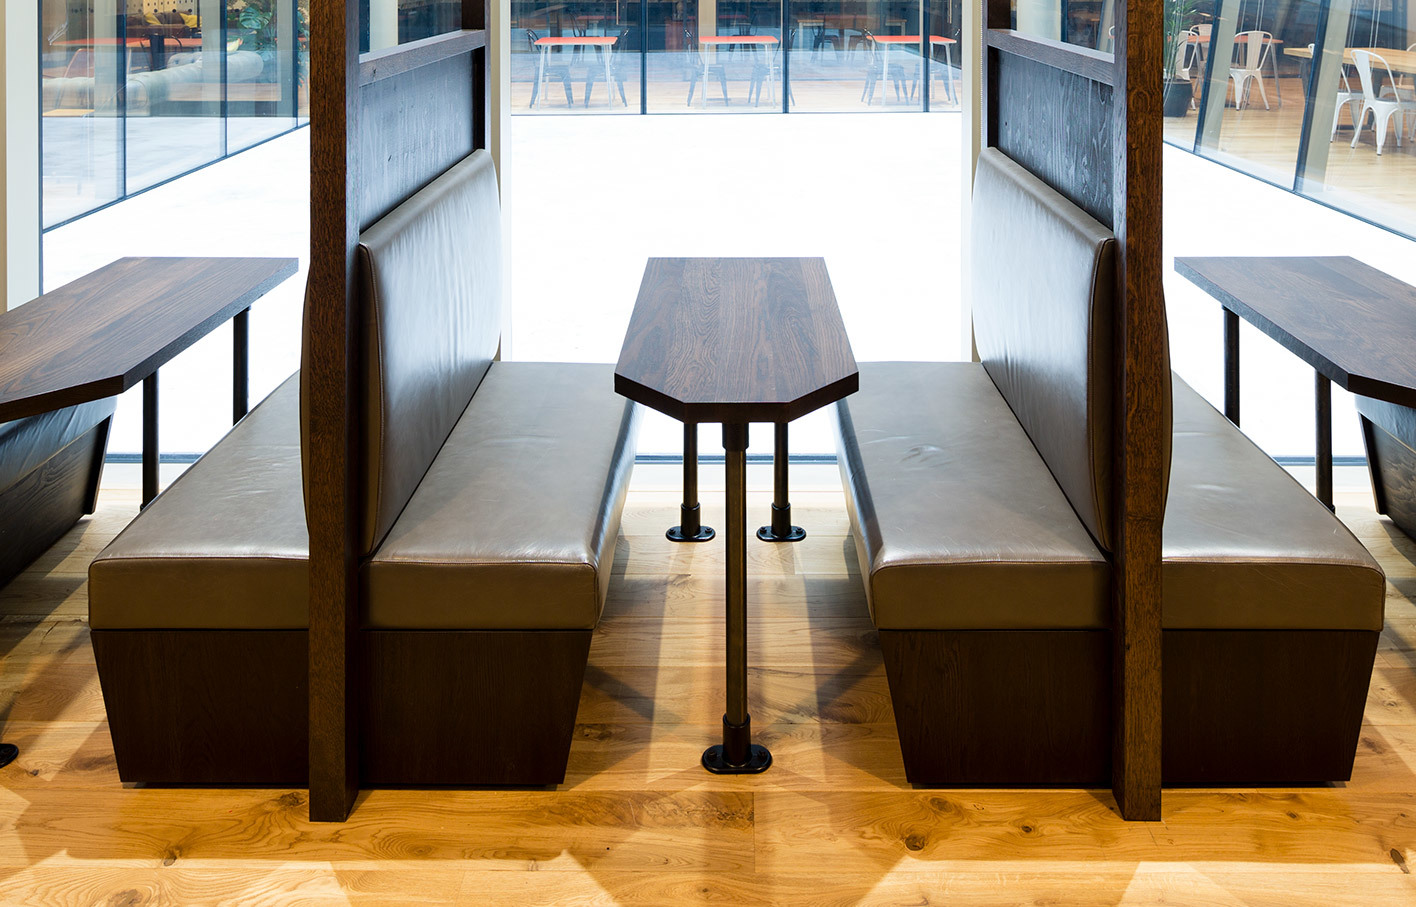 Aldworth James & Bond | Upholstered seating booths at WeWork Moor Place